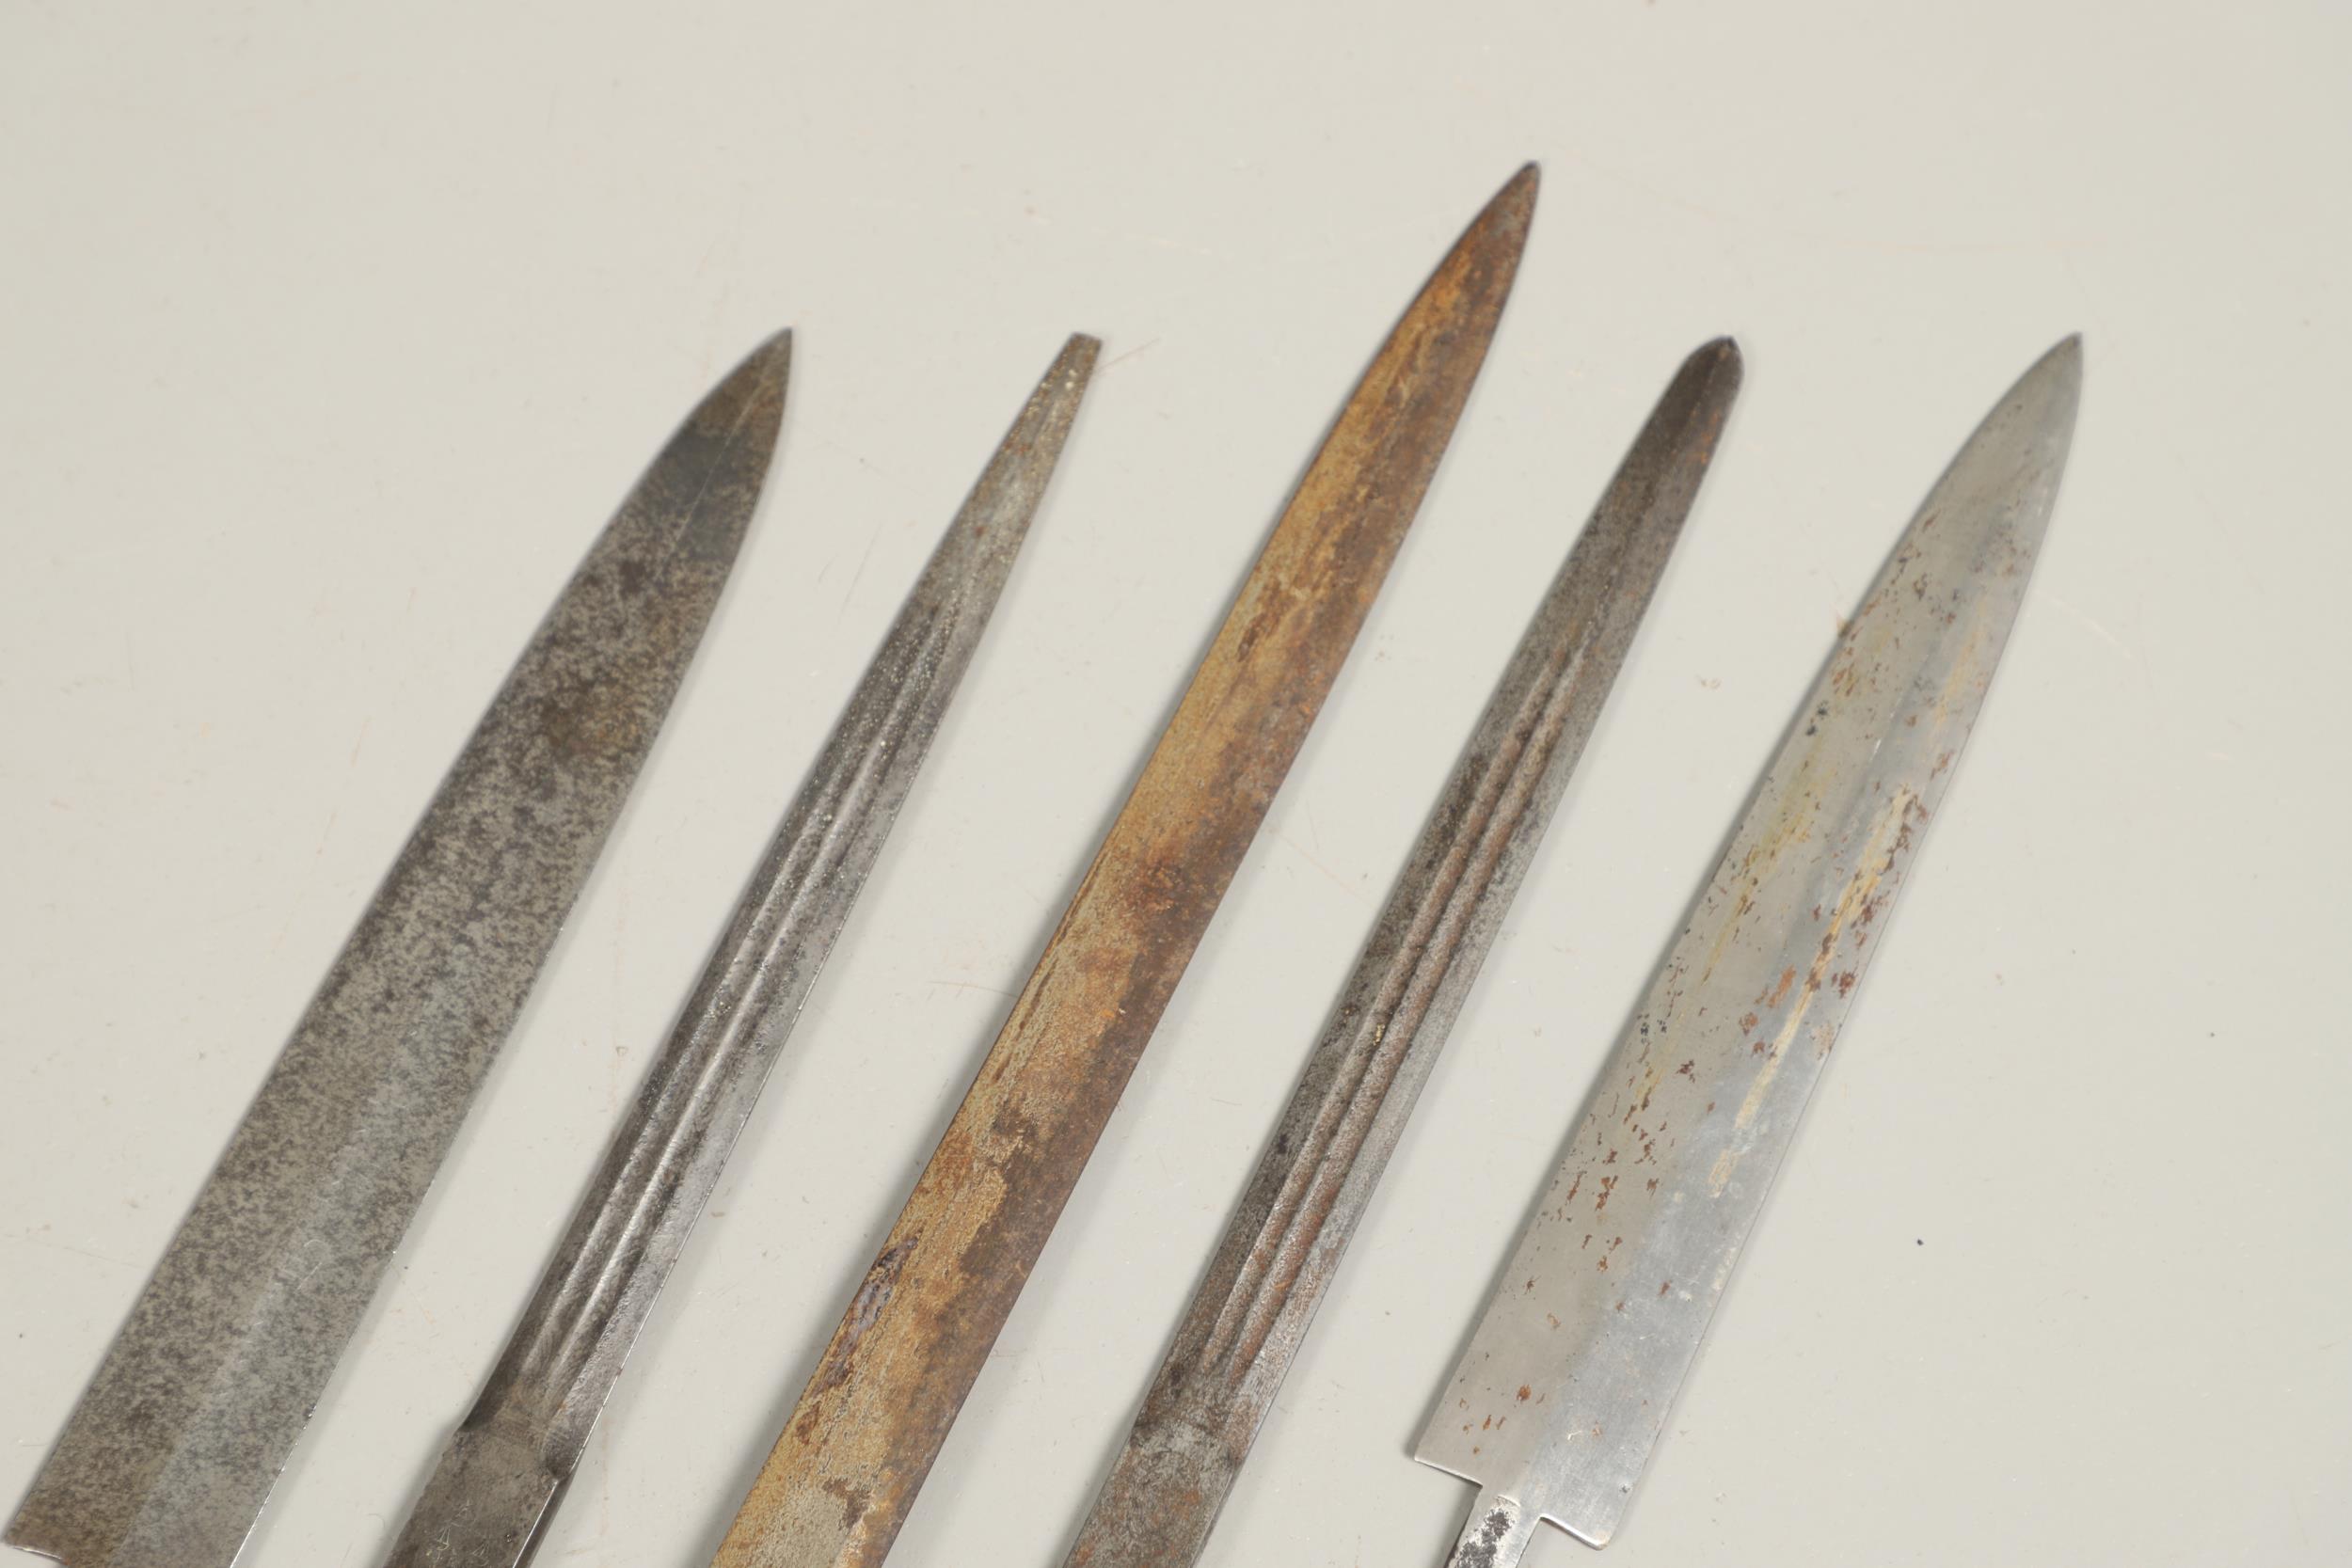 AN INTERESTING COLLECTION OF FIVE SECOND WORLD WAR GERMAN DAGGER BLADES. - Image 2 of 16